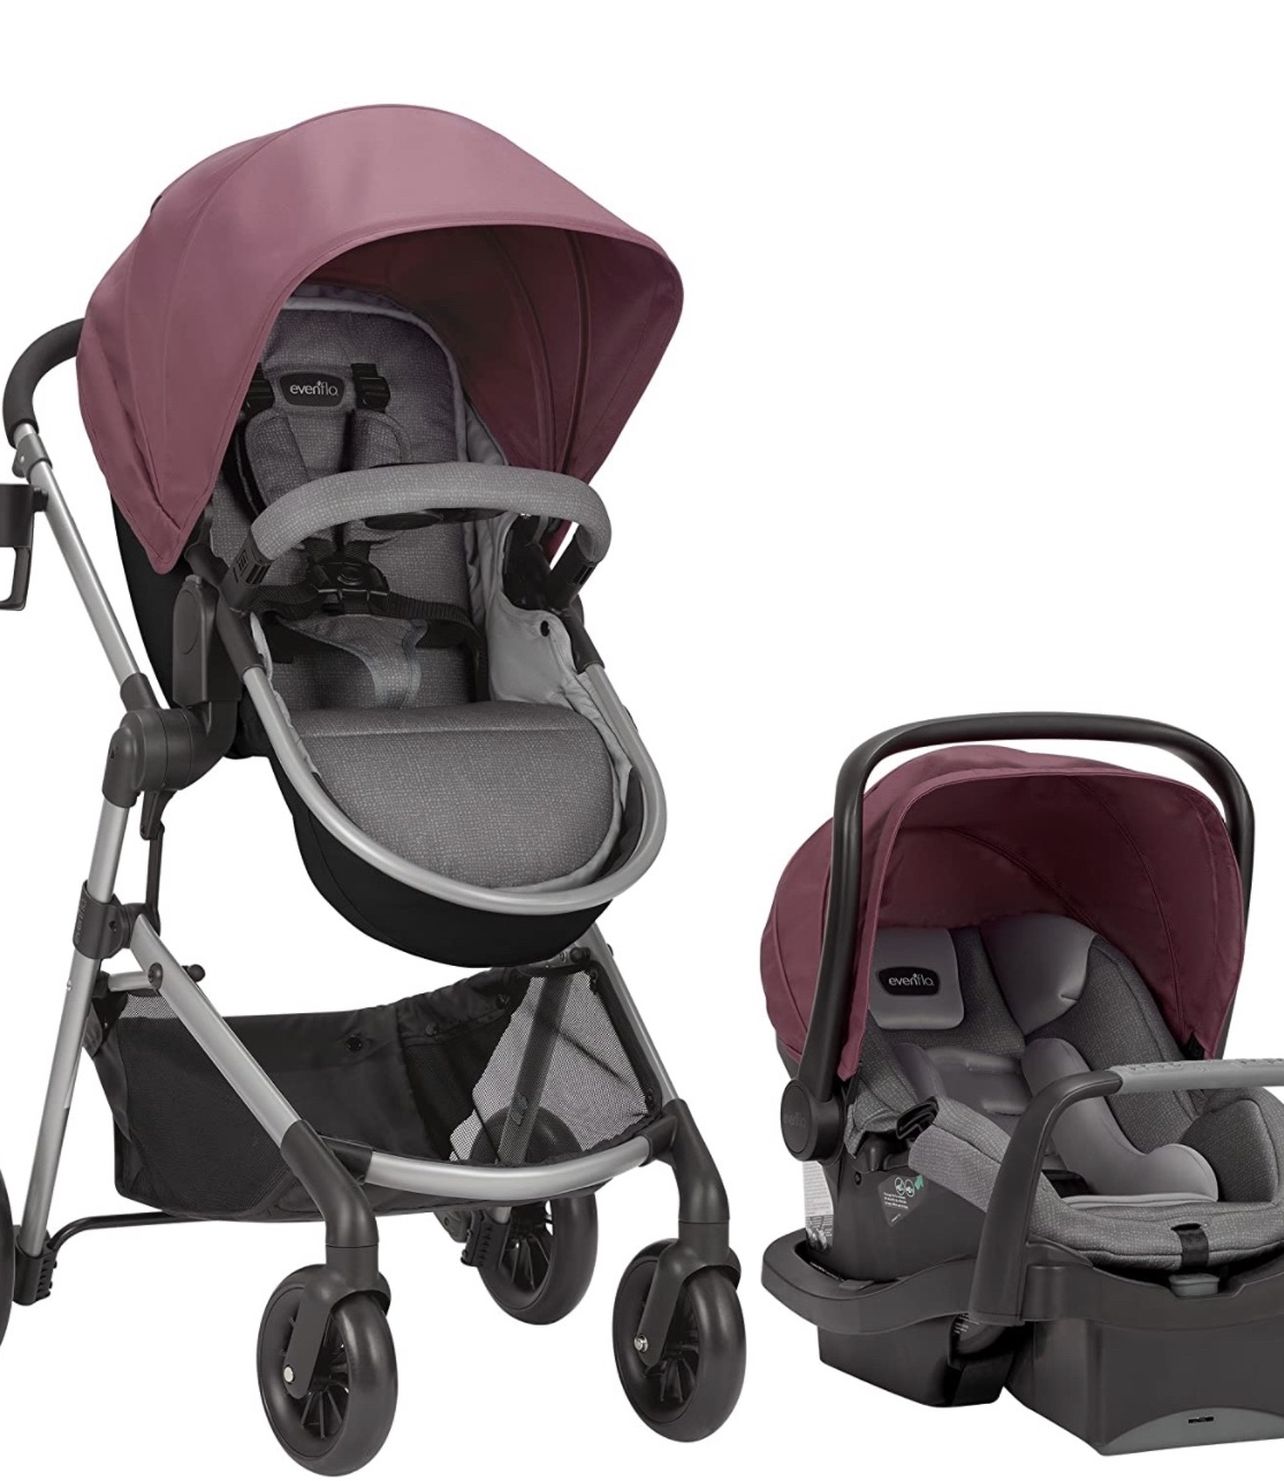 Travel System With SafeMax Car Seat